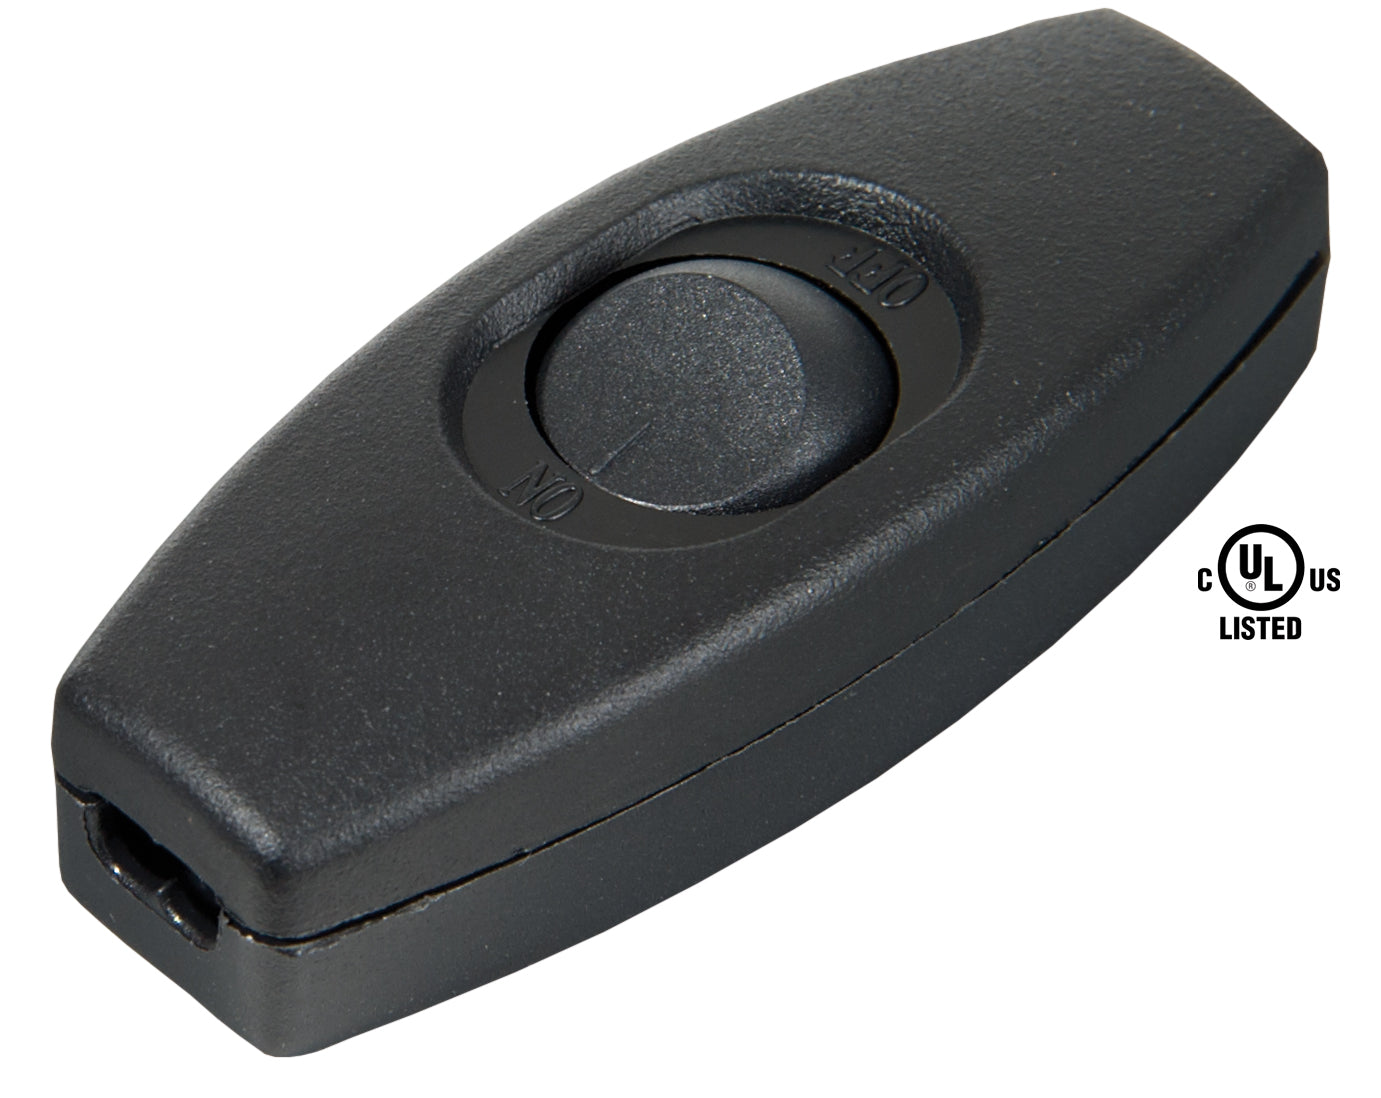 Black, Inline ON-OFF Rocker Lamp Cord Switches, Choice to Fit SPT-1 or SPT-2 Lamp Cord